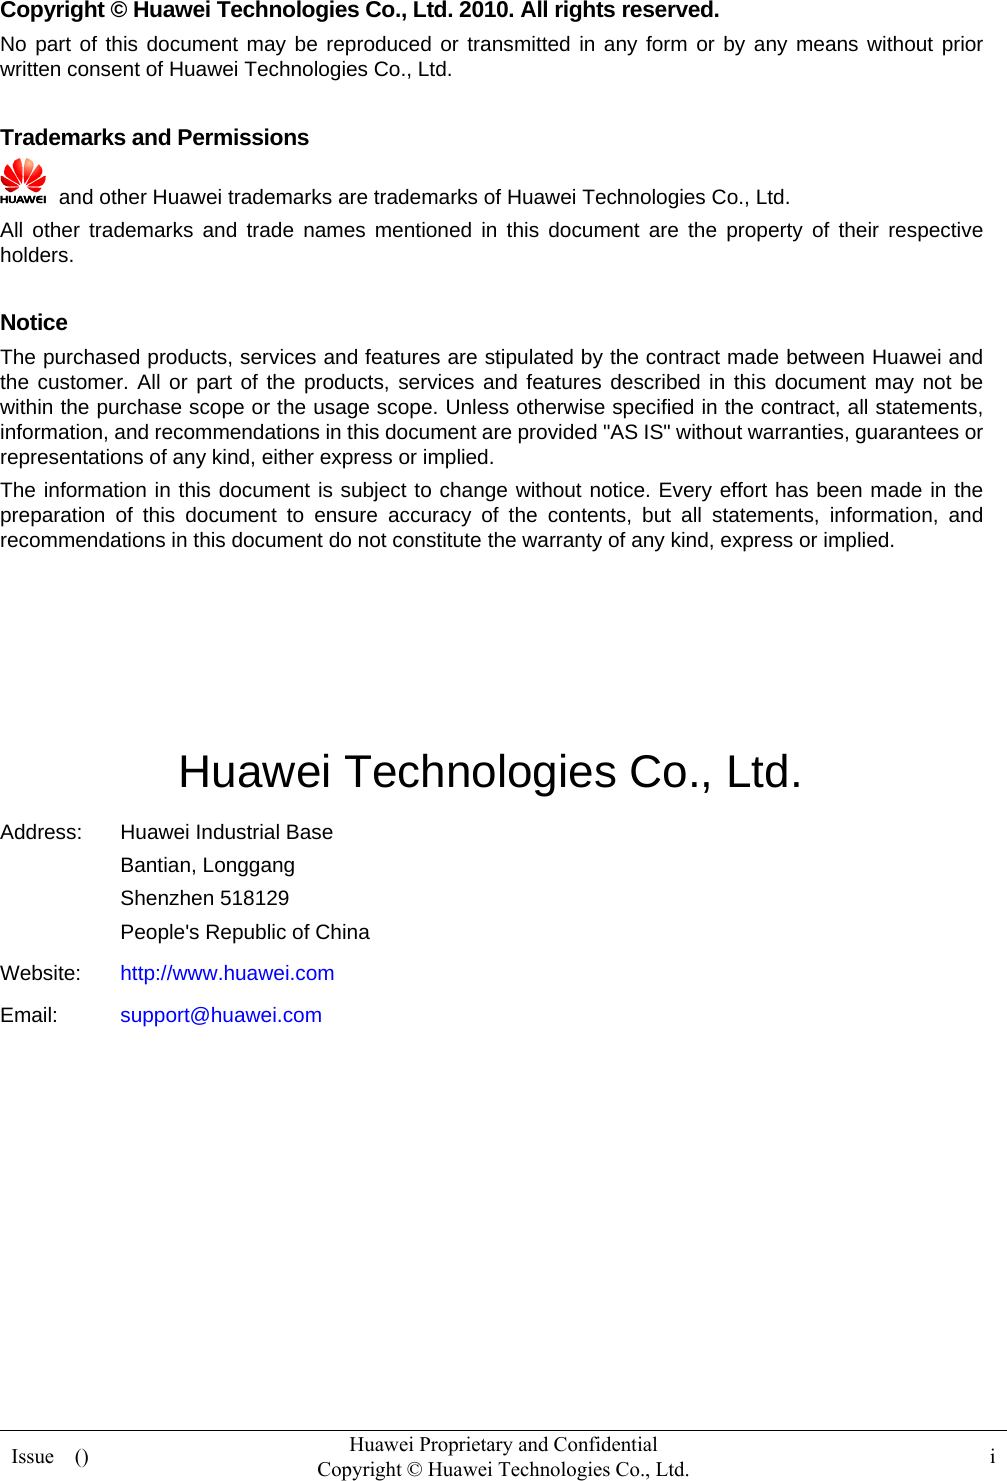  Issue  ()  Huawei Proprietary and Confidential         Copyright © Huawei Technologies Co., Ltd.  i  Copyright © Huawei Technologies Co., Ltd. 2010. All rights reserved. No part of this document may be reproduced or transmitted in any form or by any means without prior written consent of Huawei Technologies Co., Ltd.  Trademarks and Permissions   and other Huawei trademarks are trademarks of Huawei Technologies Co., Ltd. All other trademarks and trade names mentioned in this document are the property of their respective holders.  Notice The purchased products, services and features are stipulated by the contract made between Huawei and the customer. All or part of the products, services and features described in this document may not be within the purchase scope or the usage scope. Unless otherwise specified in the contract, all statements, information, and recommendations in this document are provided &quot;AS IS&quot; without warranties, guarantees or representations of any kind, either express or implied. The information in this document is subject to change without notice. Every effort has been made in the preparation of this document to ensure accuracy of the contents, but all statements, information, and recommendations in this document do not constitute the warranty of any kind, express or implied.     Huawei Technologies Co., Ltd. Address:  Huawei Industrial Base Bantian, Longgang Shenzhen 518129 People&apos;s Republic of China Website:  http://www.huawei.com Email:  support@huawei.com          